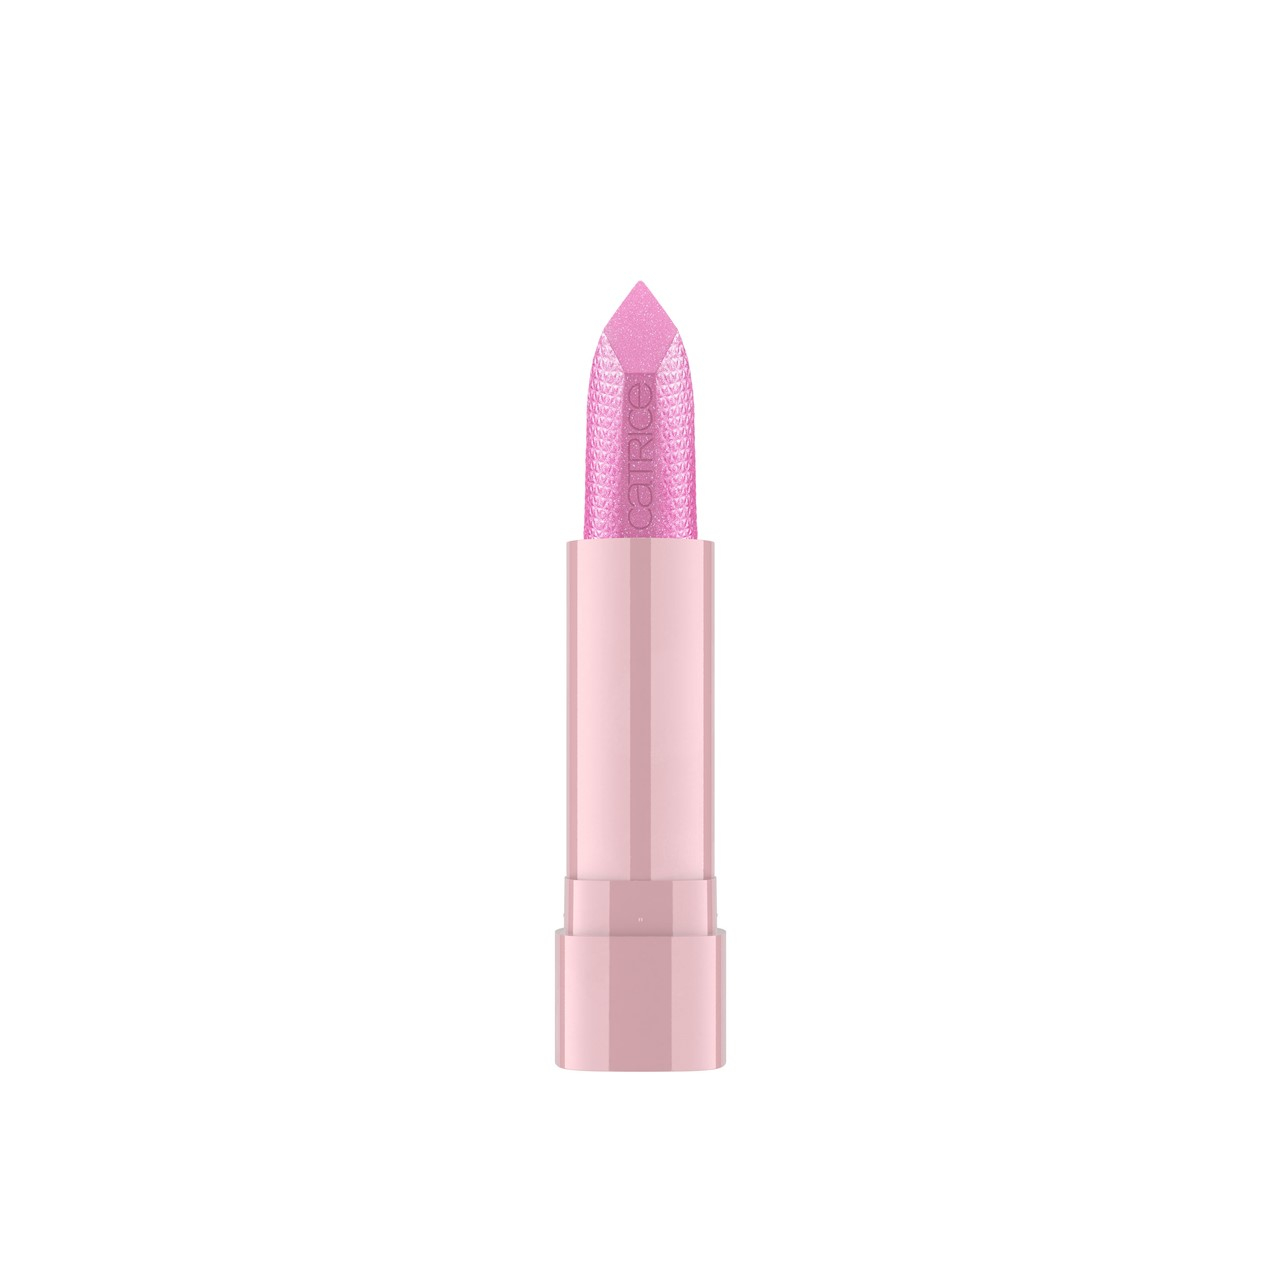 Catrice Drunk'n Diamonds Plumping Lip Balm 030 I Couldn't Caratless 3.5g (0.12oz)